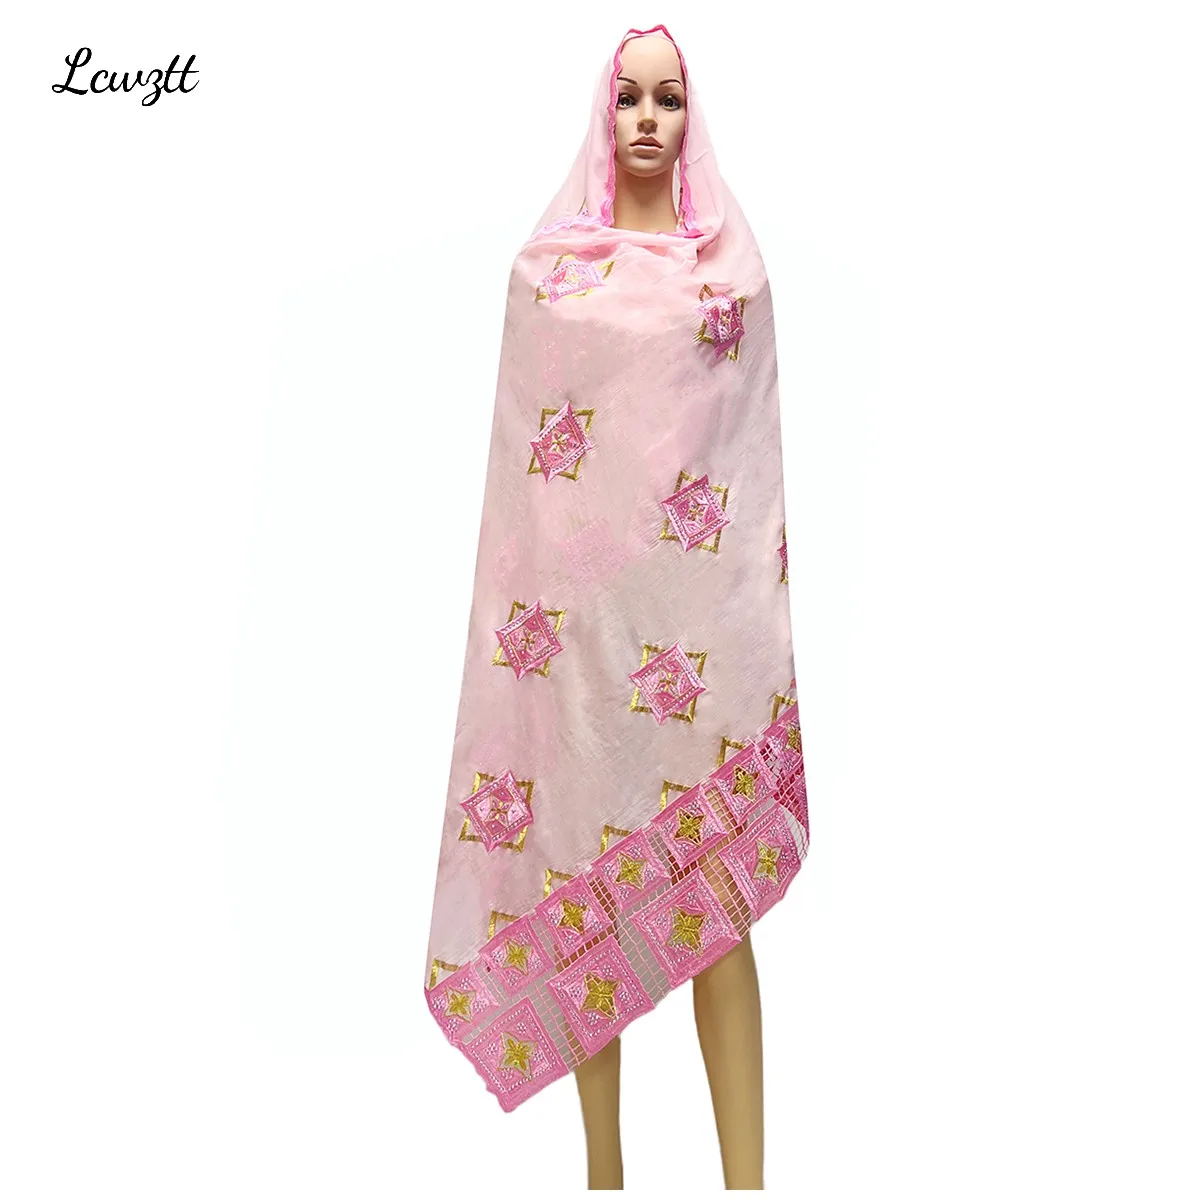 2022 Hot Sale African Women Scarfs Big Circle Design Big Embrodiery 100% Cotton With Grenadine  Big Scarf for Shawls Pashmina